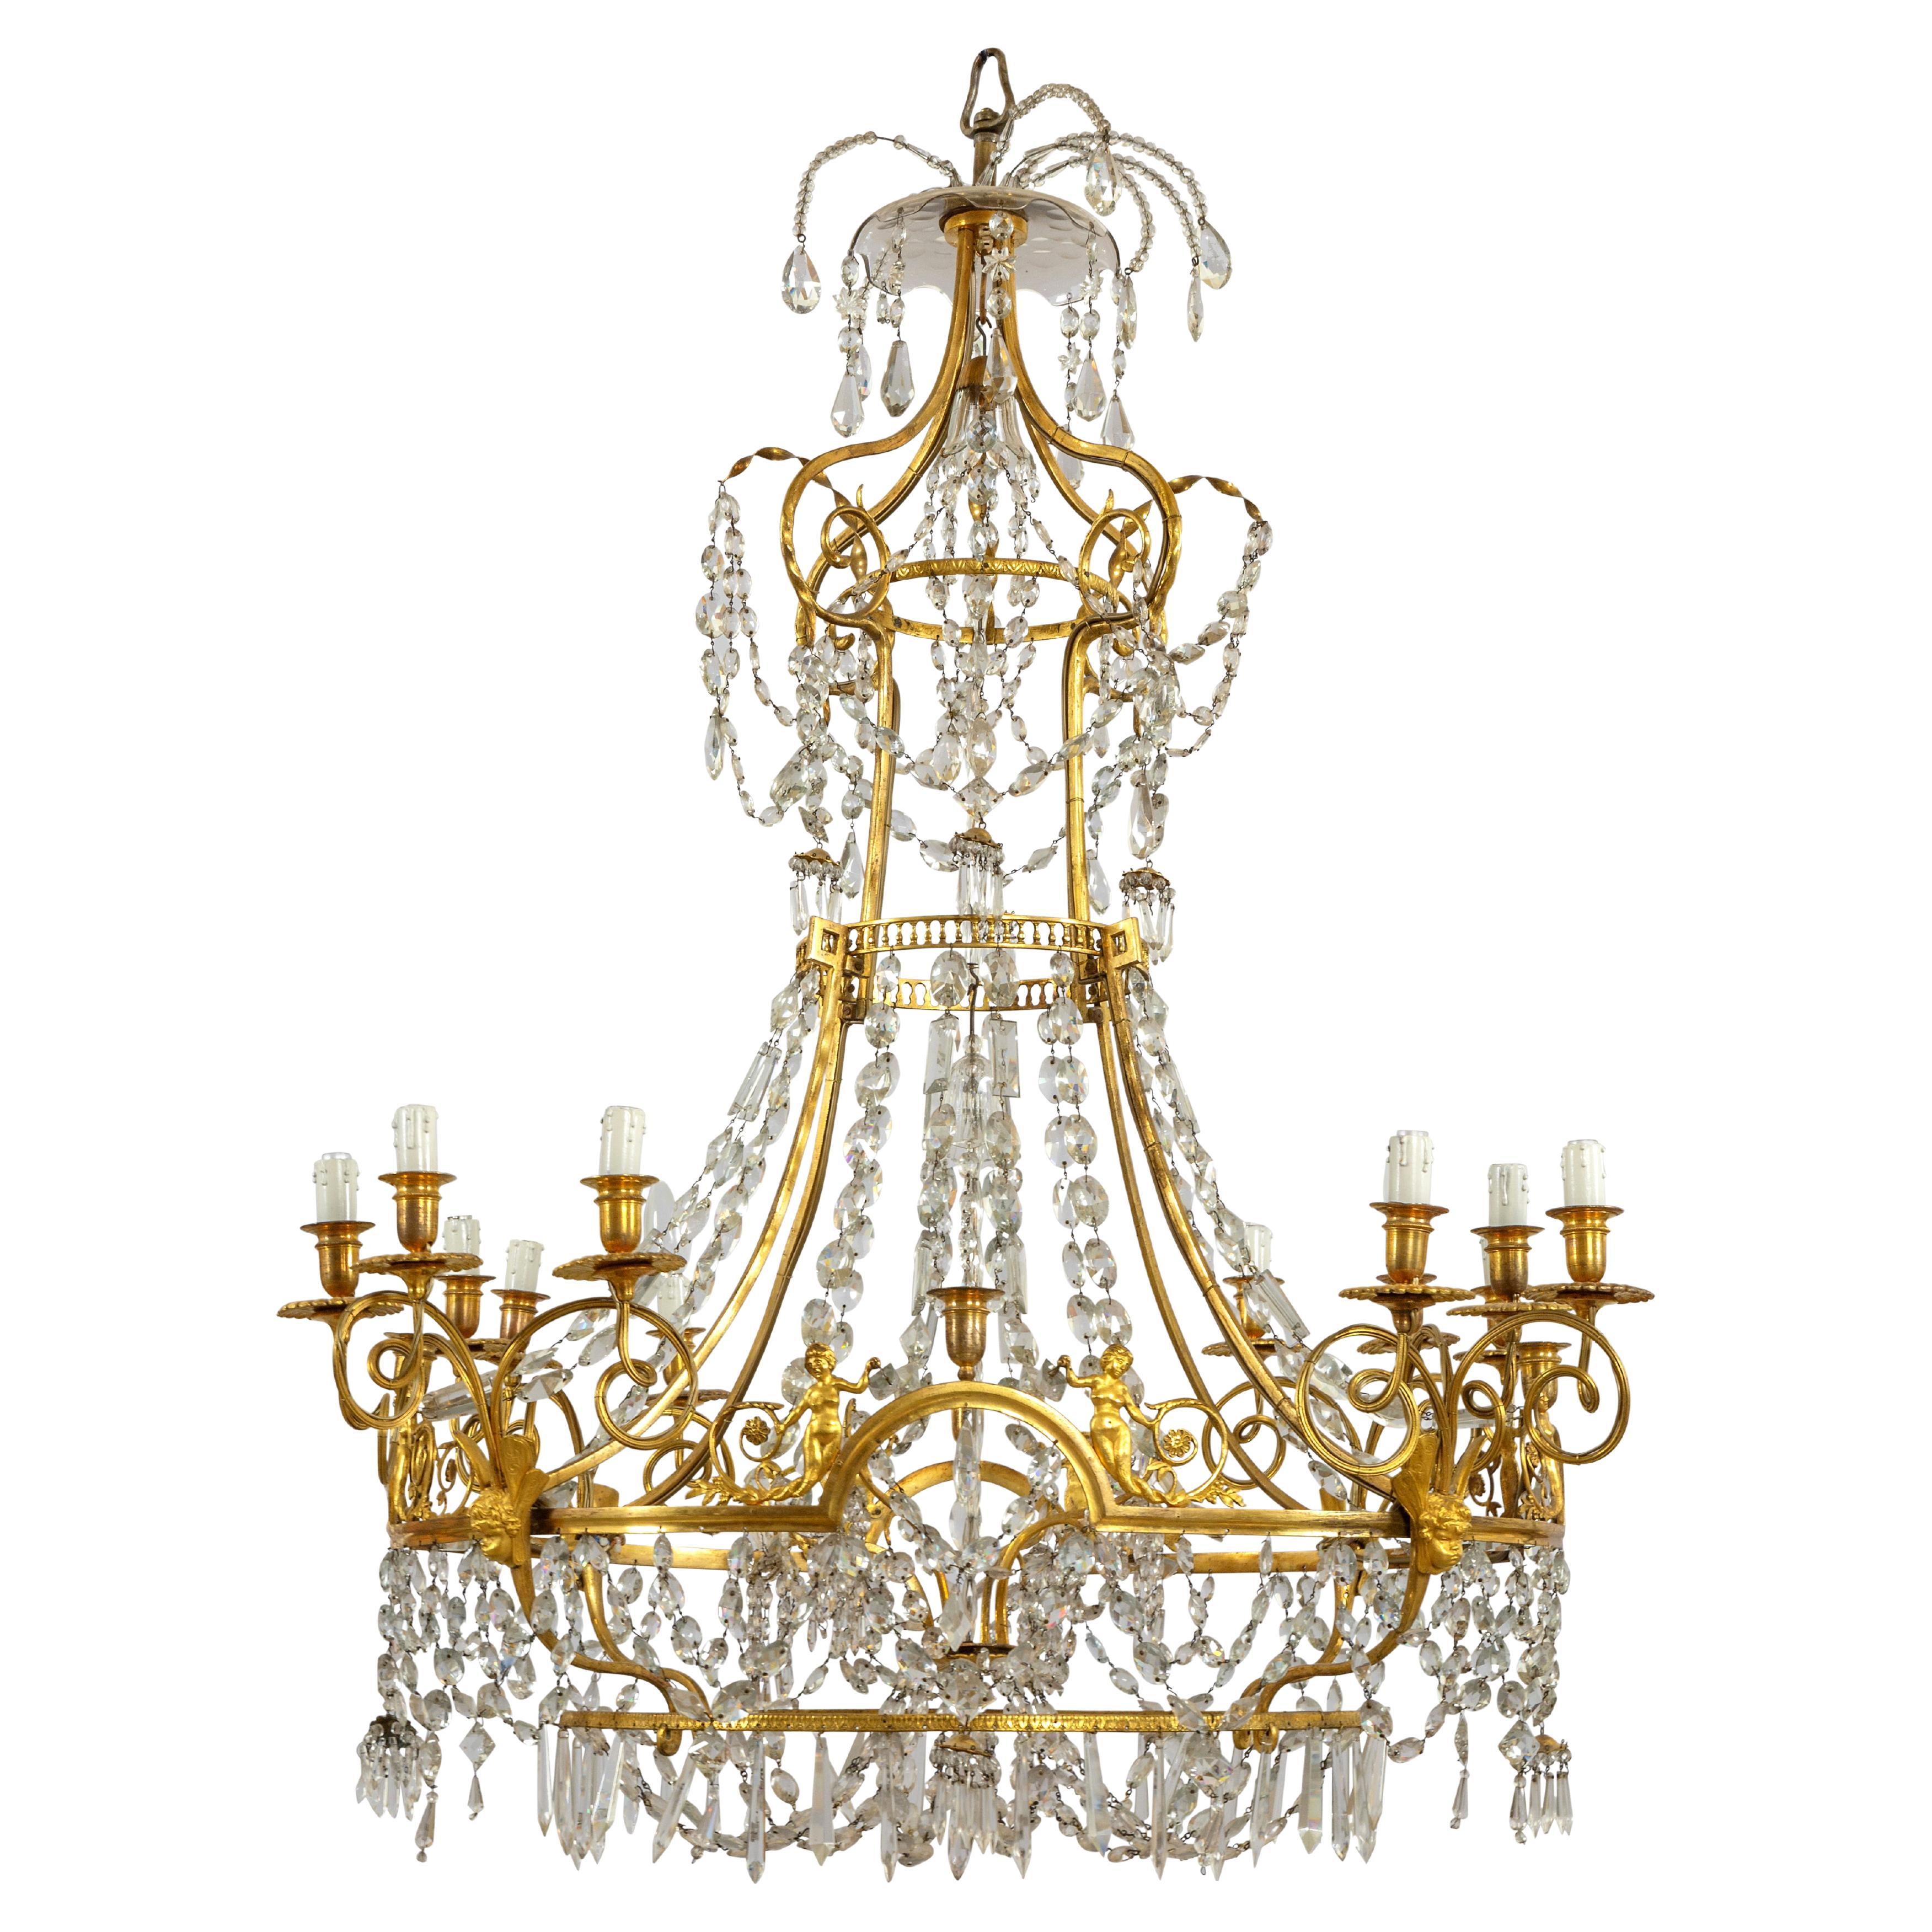 19th Century, Large French Gilt Bronze and Crystal Chandelier with Twelve Lights